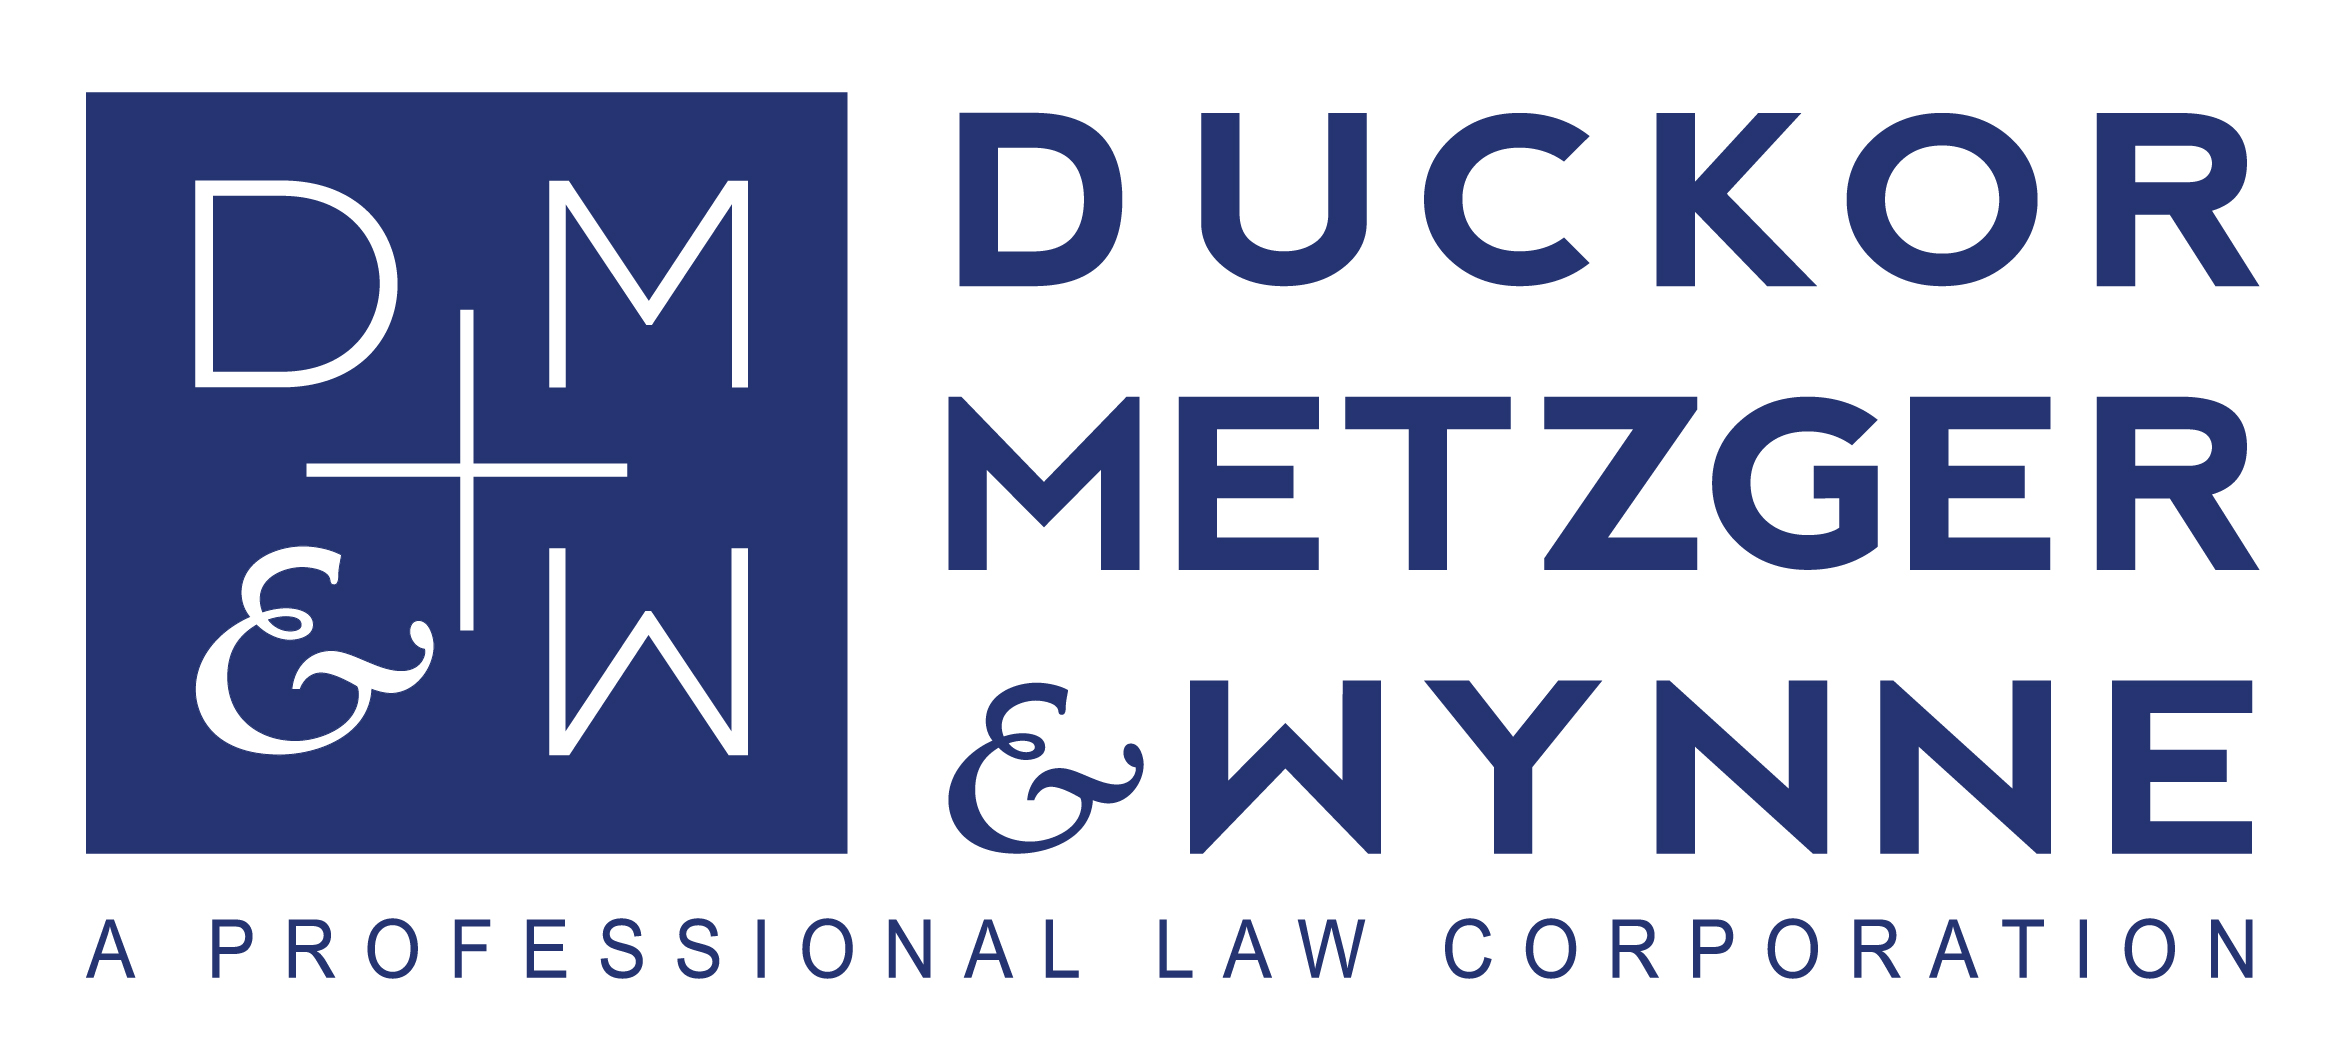 duckor-metzger-wynne-announces-new-name-practice-area-and-managing-partner